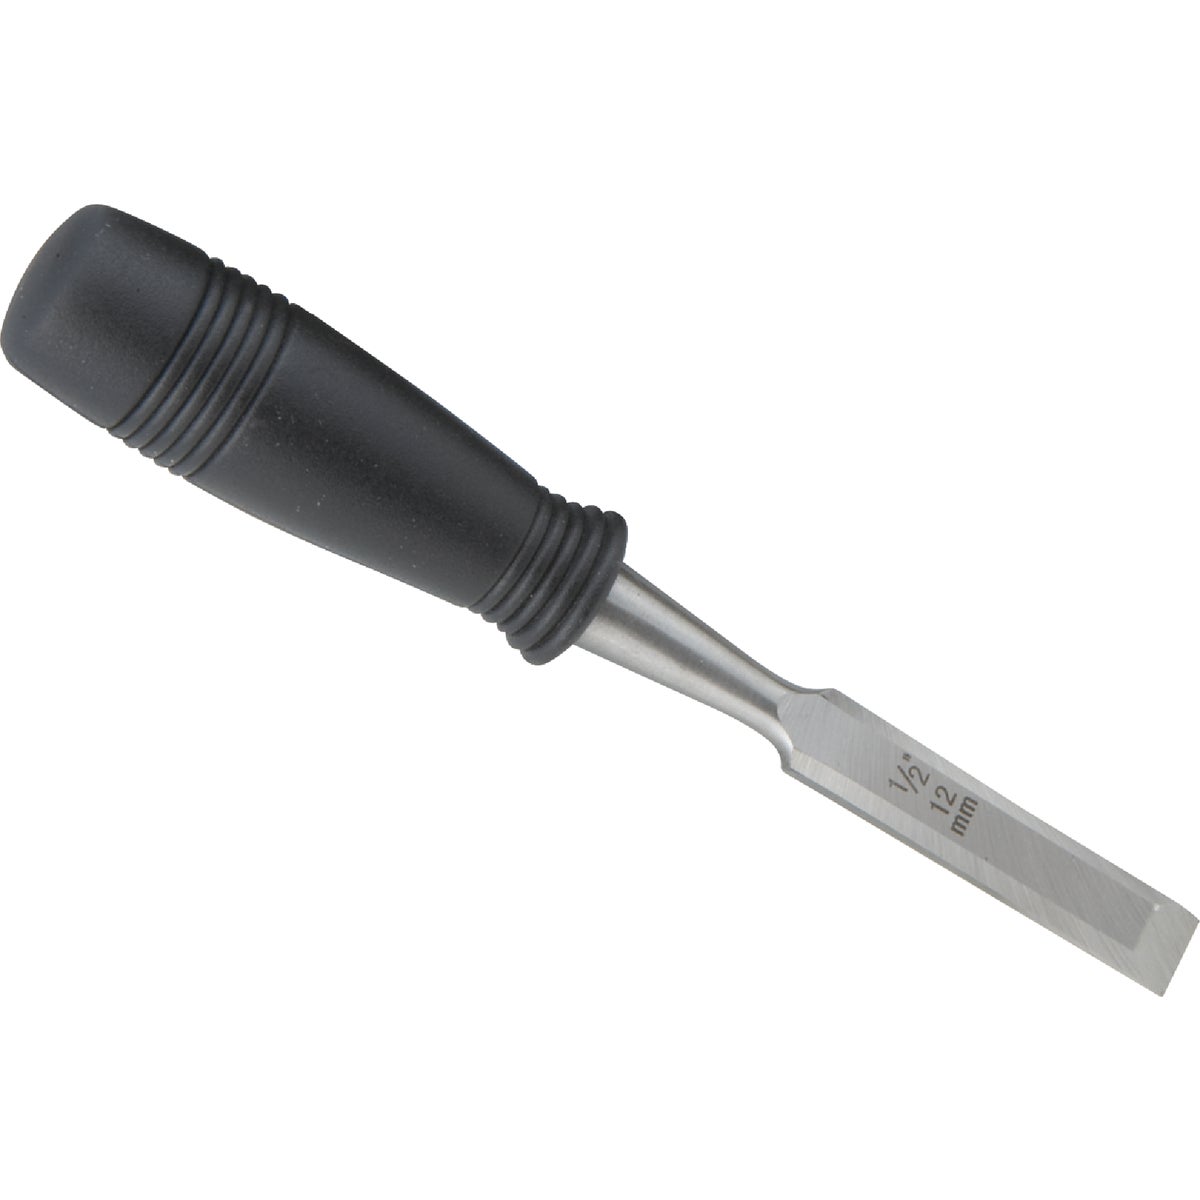 Item 307653, These wood chisels feature an extra sharp, heavy duty hardened steel 